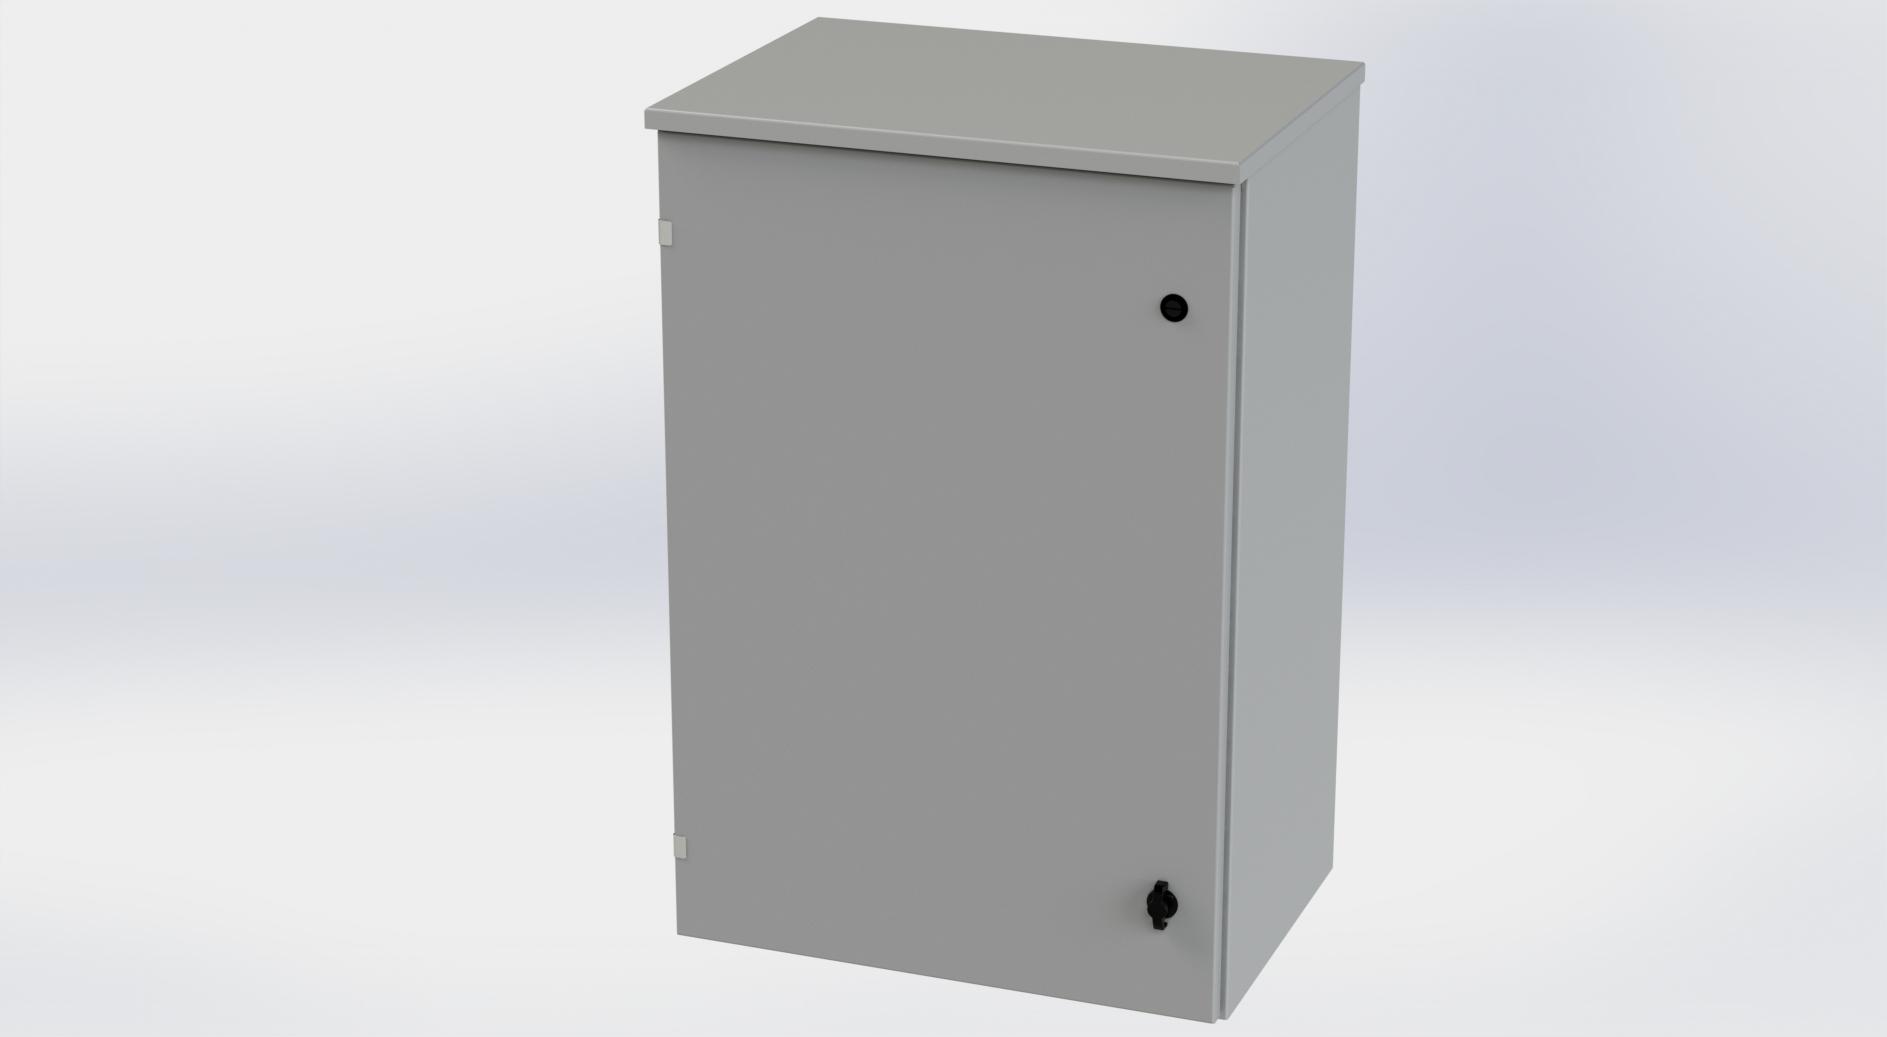 Saginaw Control SCE-36R2416LP Type-3R Hinged Cover Enclosure, Height:36.00", Width:24.00", Depth:16.00", ANSI-61 gray powder coating inside and out. Optional sub-panels are powder coated white.